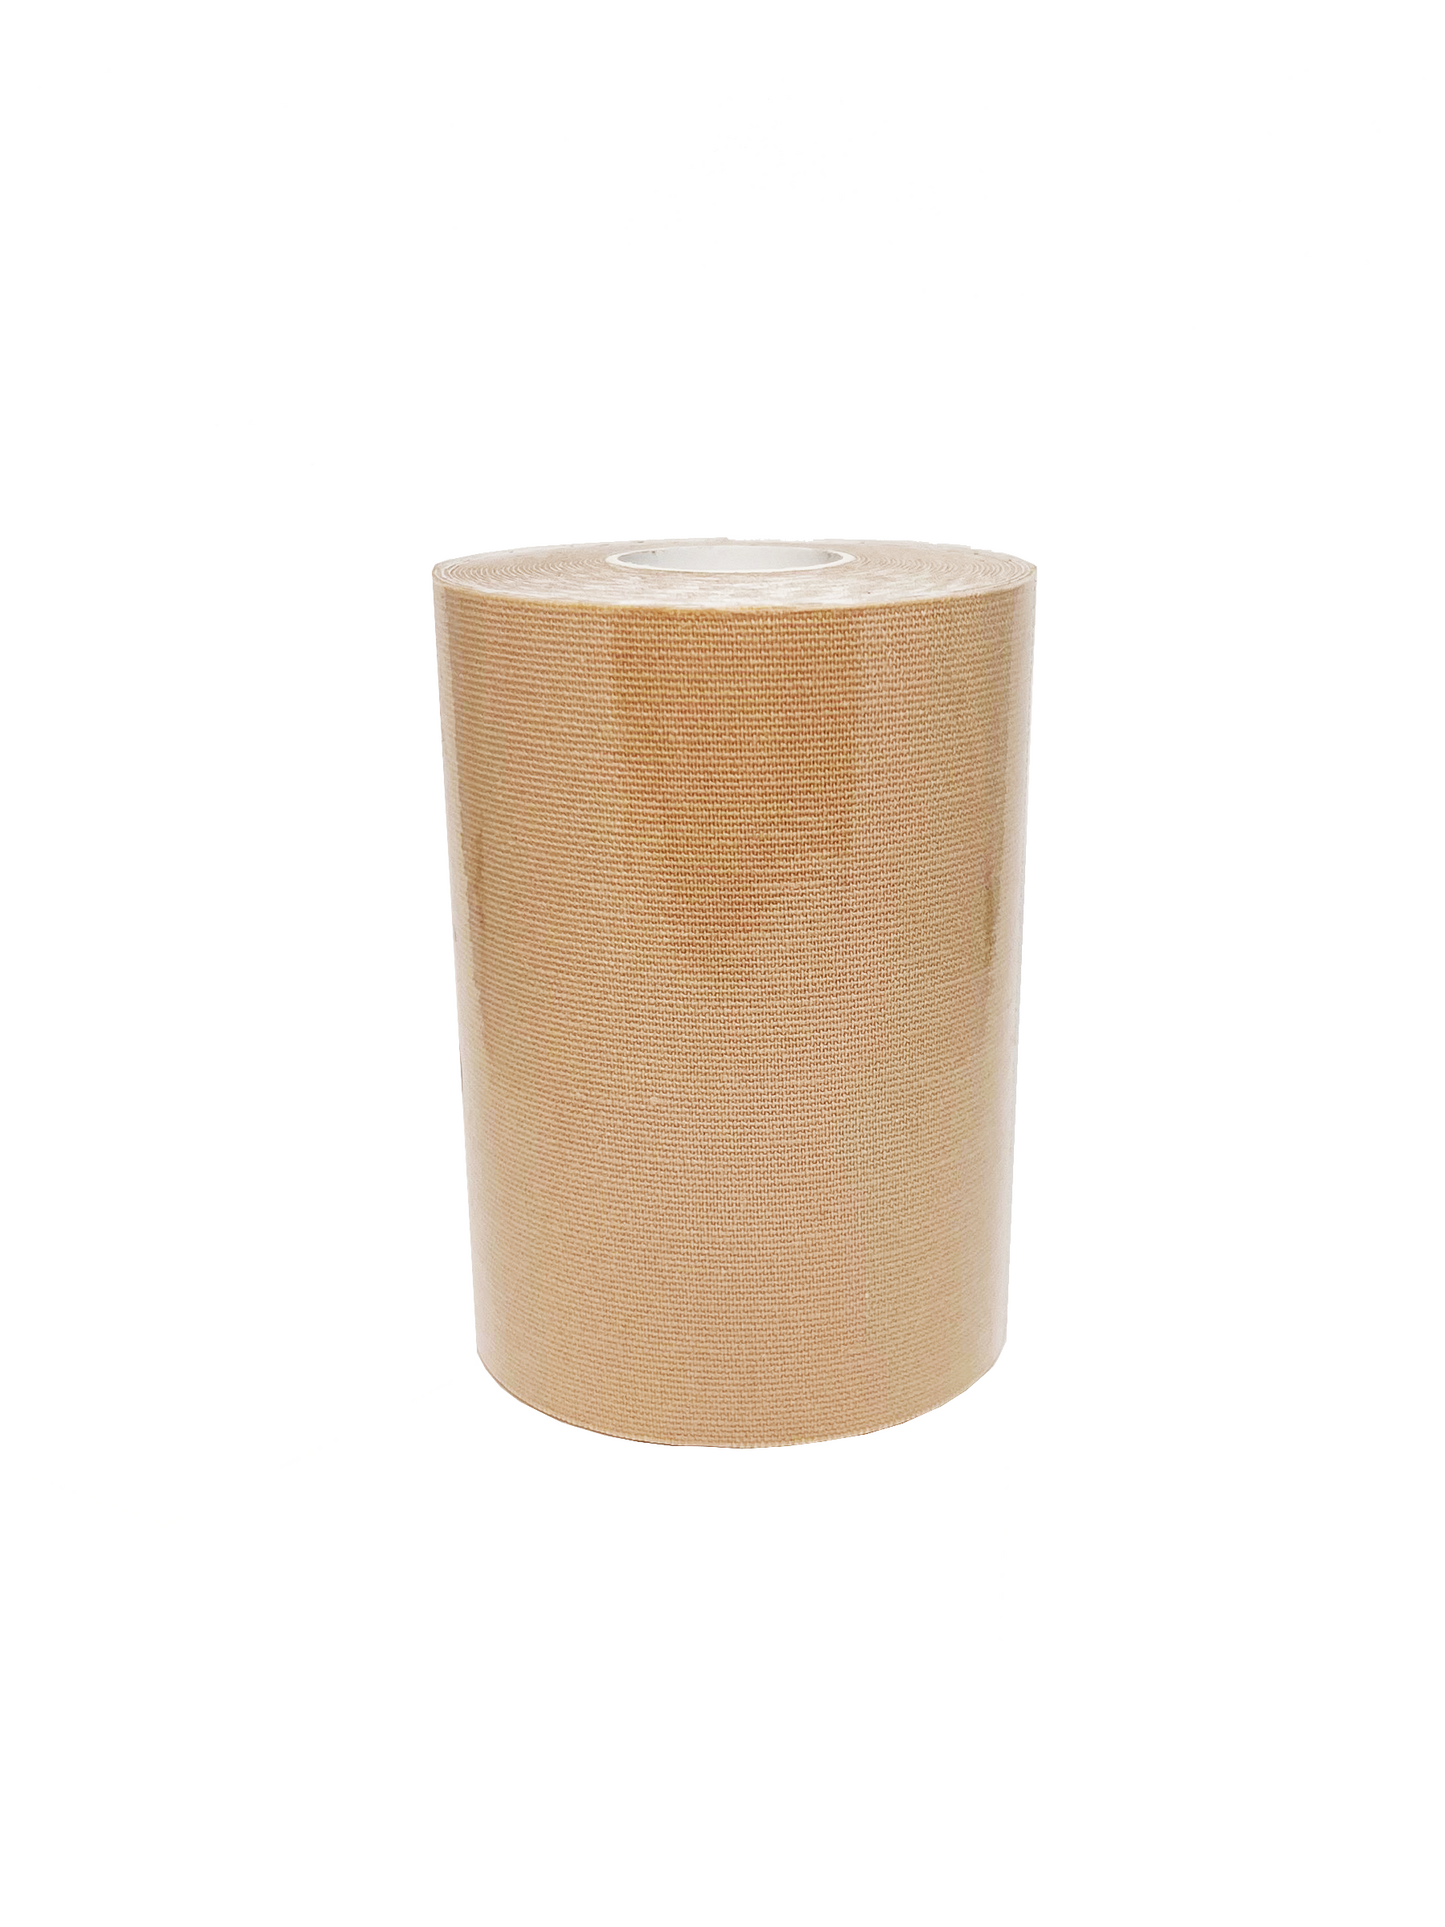 Trans Binding Tape Roll - Come As You Are –